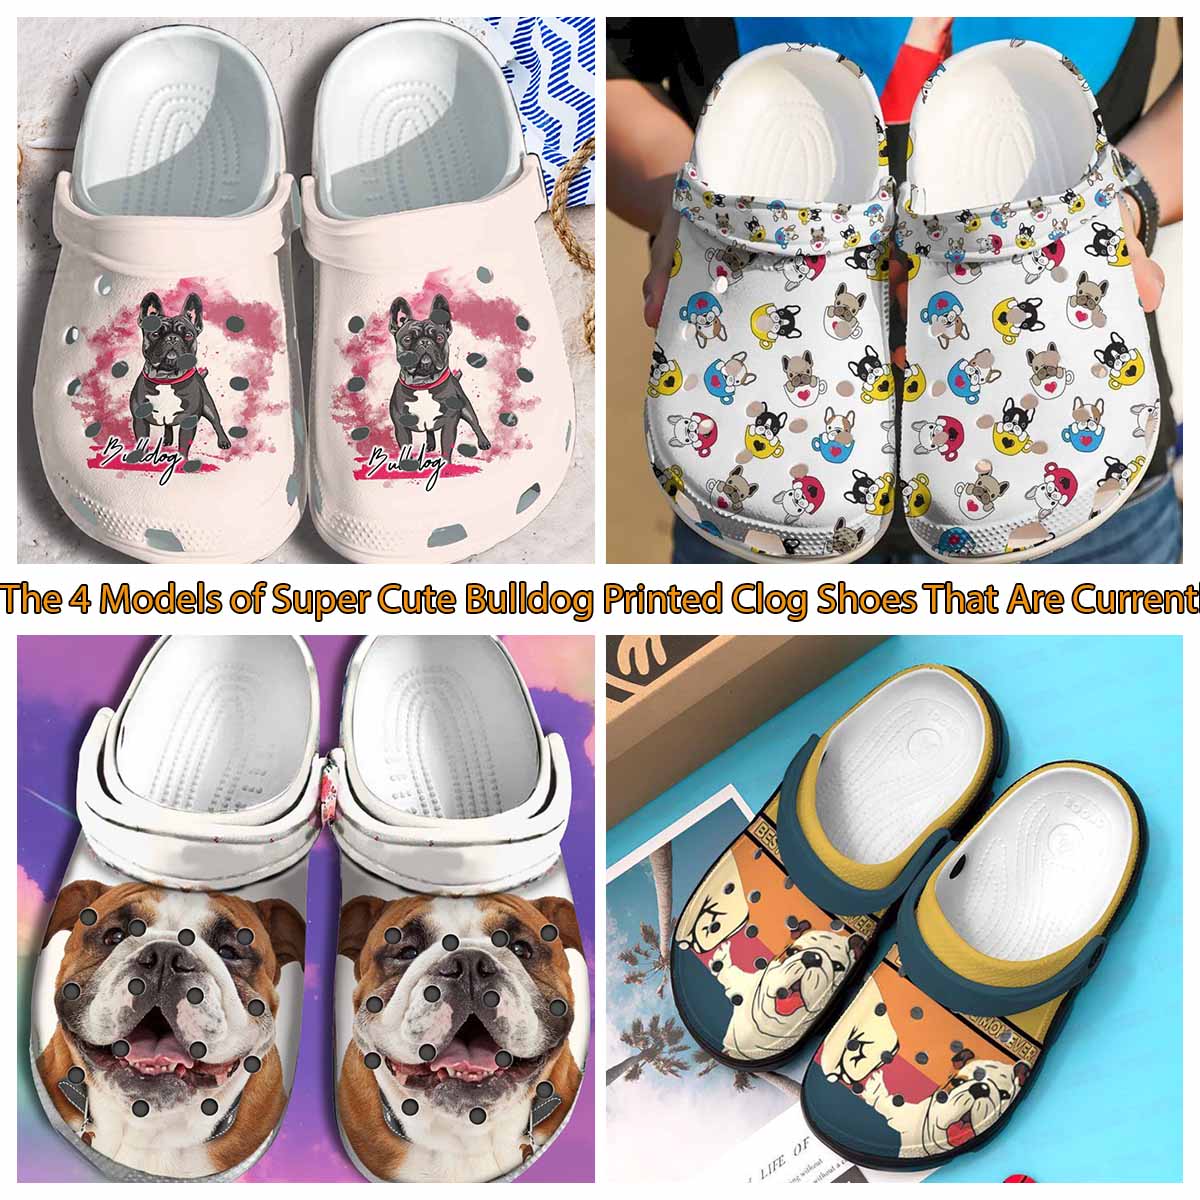 The 4 Models of Super Cute Bulldog Printed Clog Shoes That Are Currently Trending